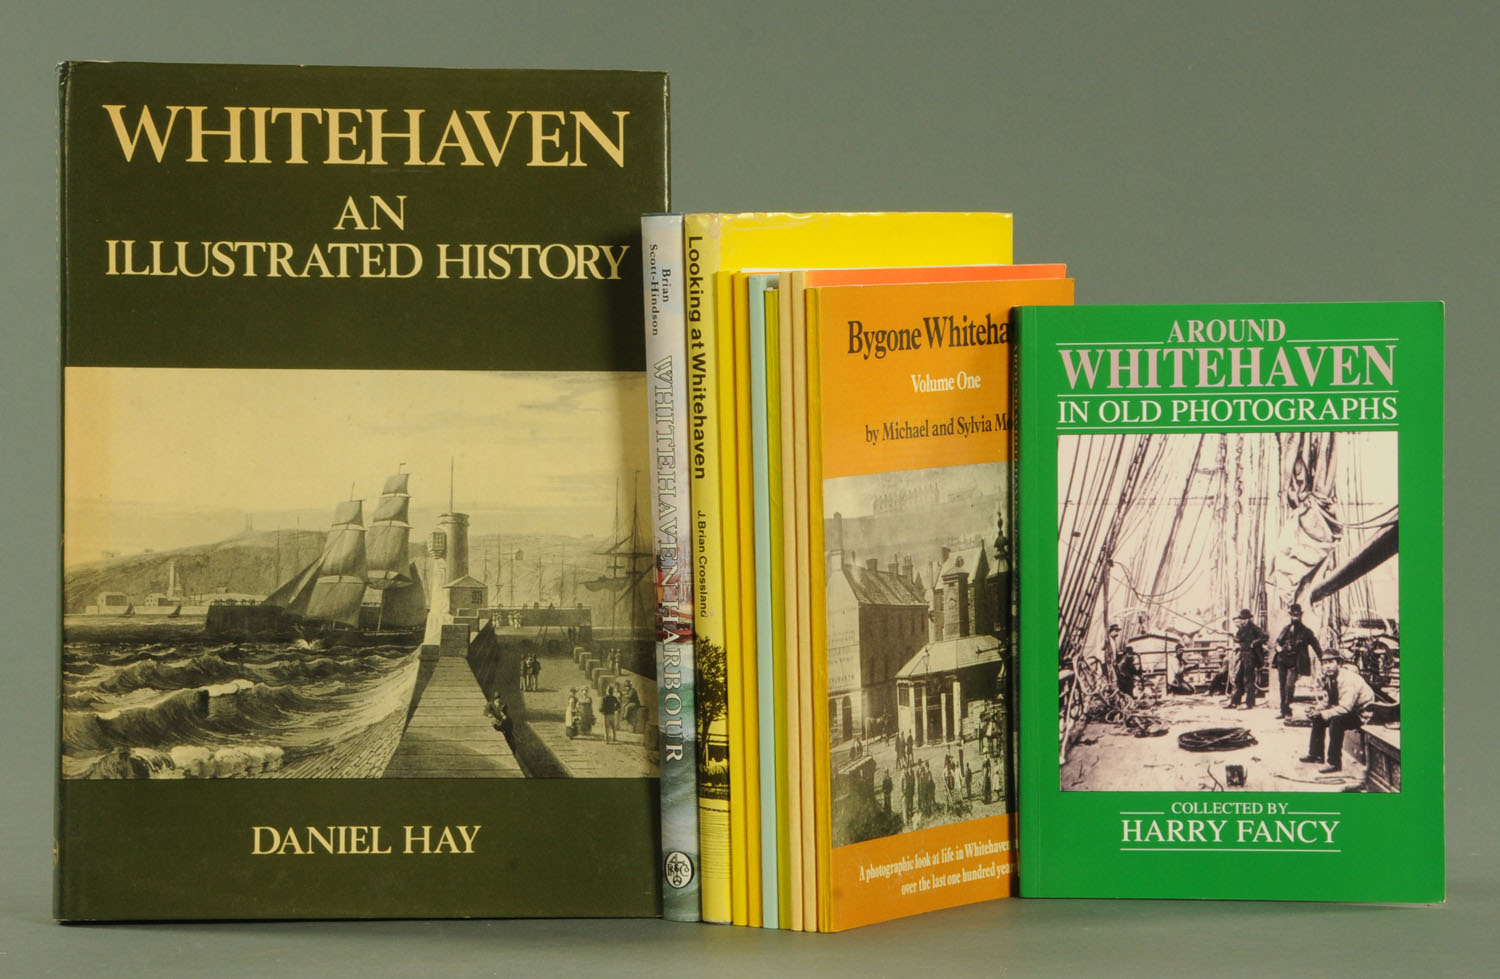 Eleven books about Whitehaven, "Bygone Whitehaven" by Michael & Sylvia Moon, volumes 1,